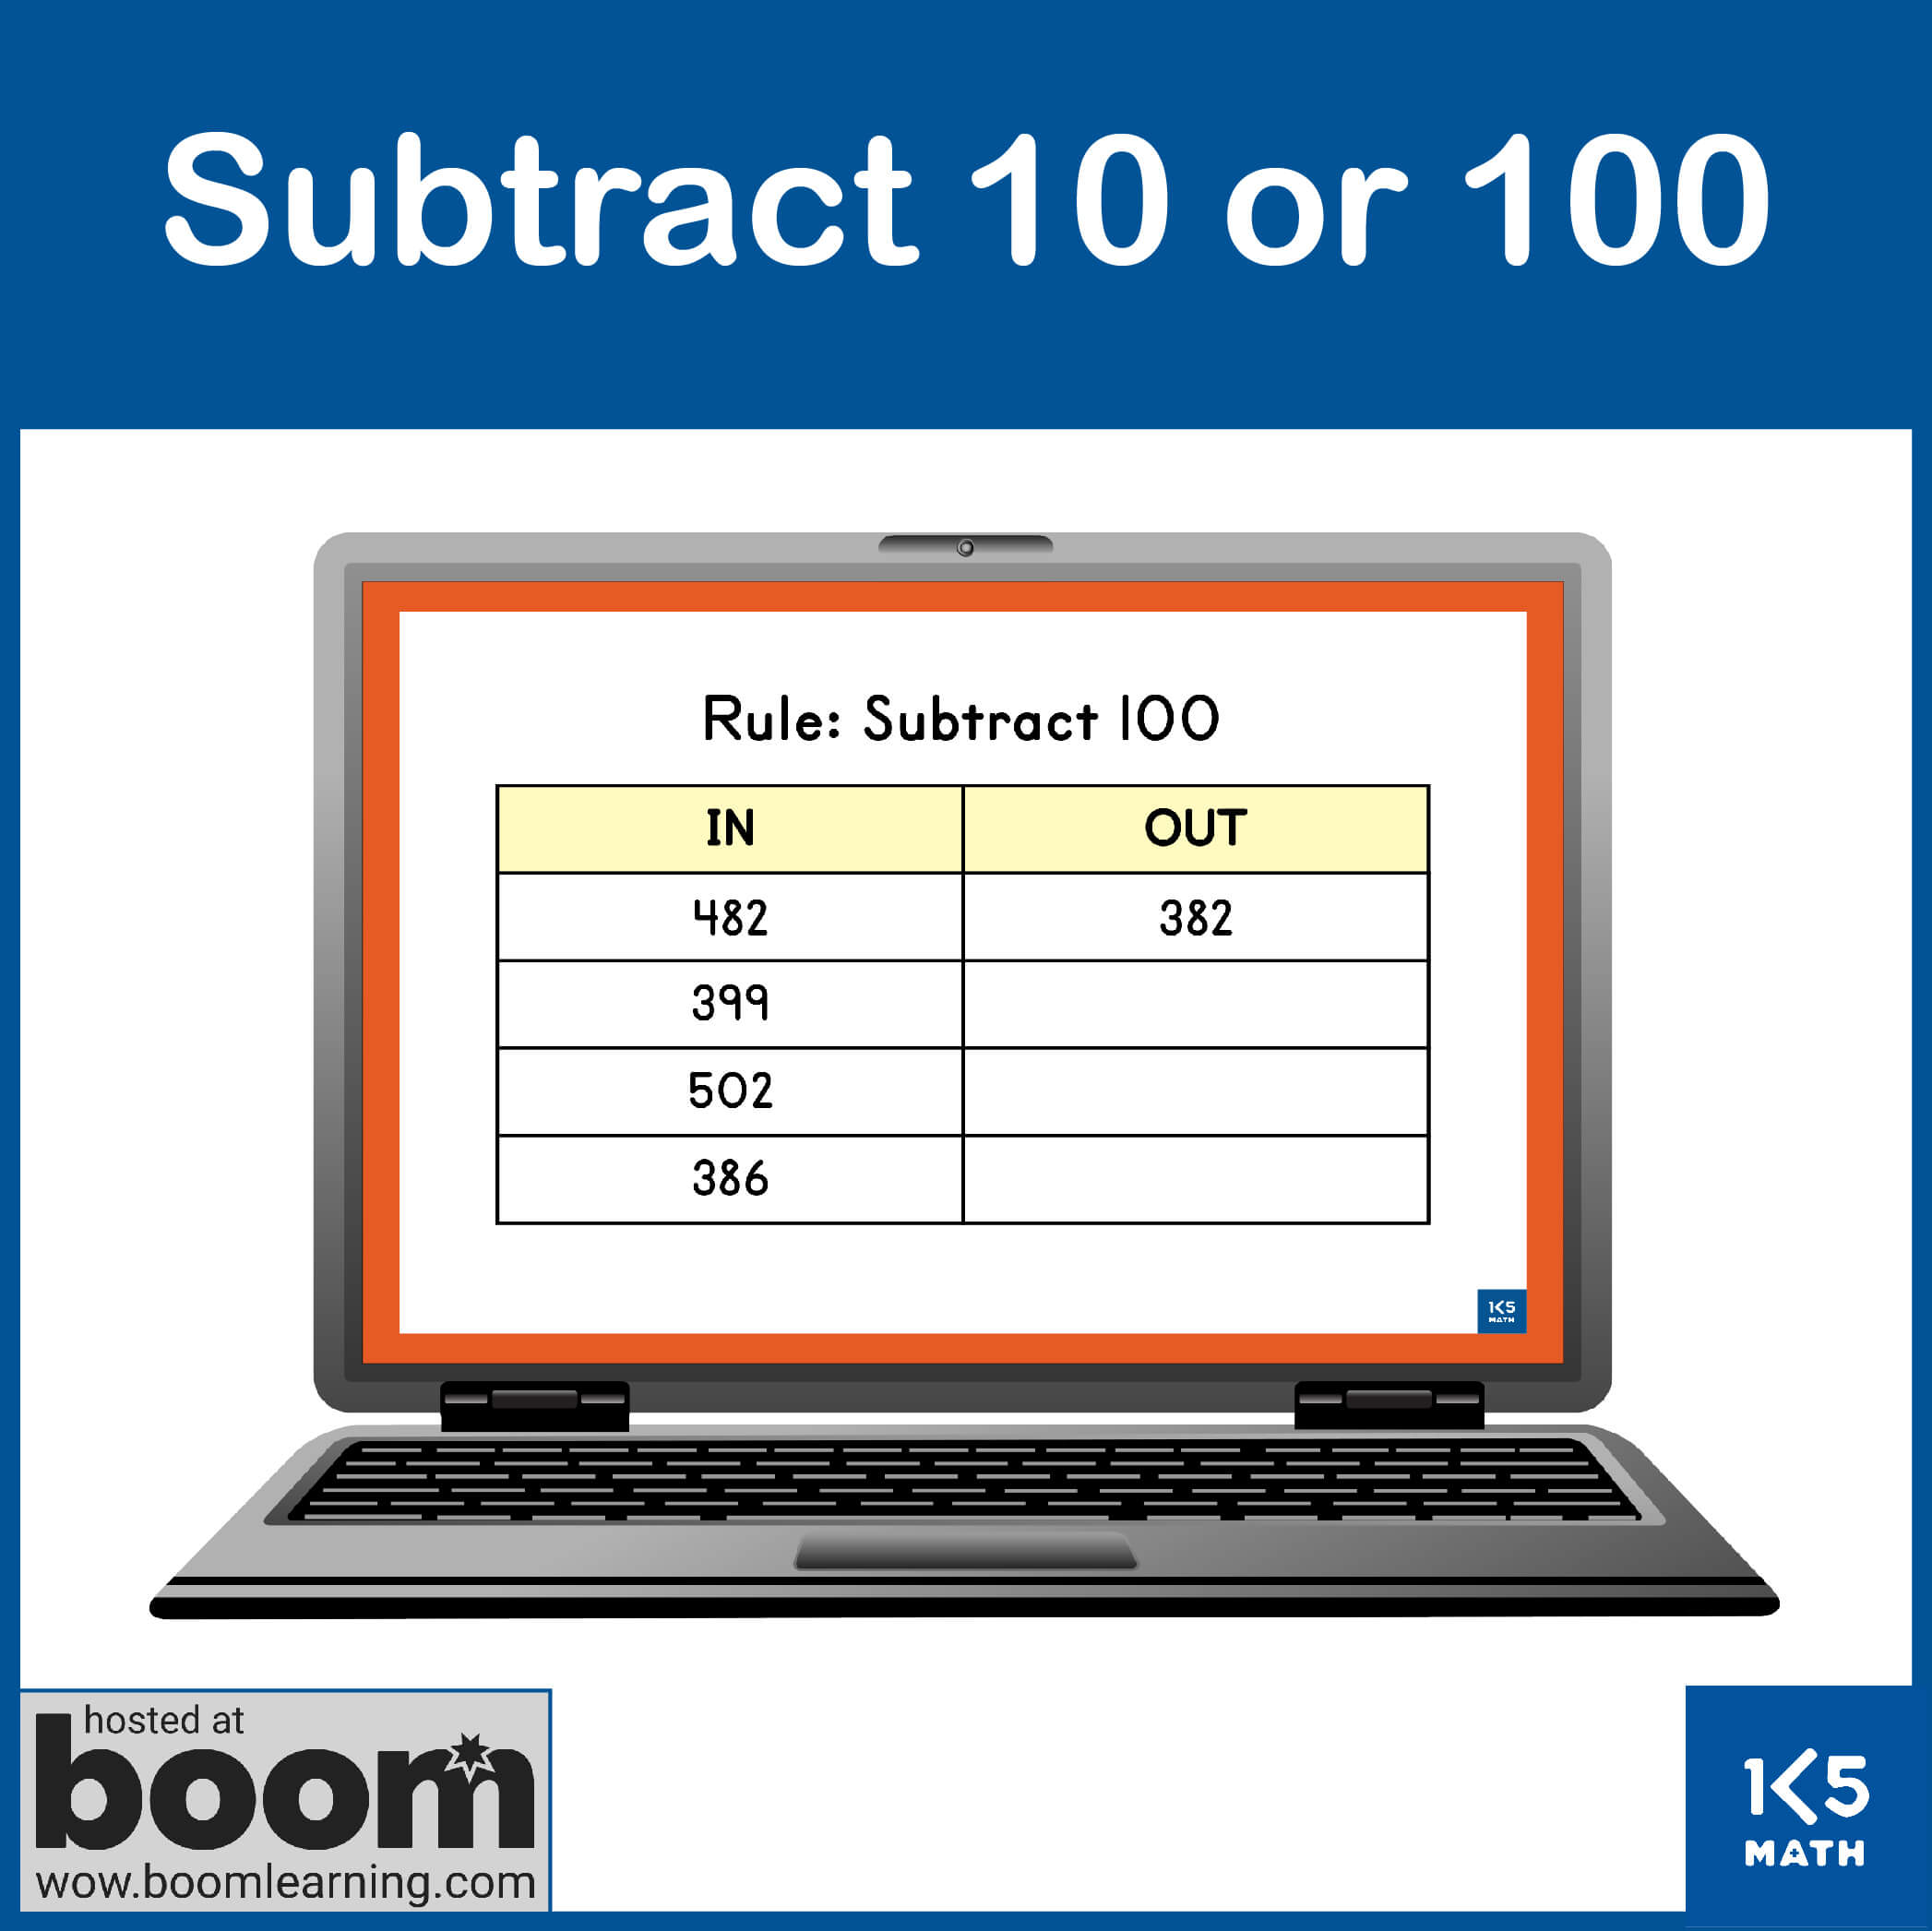 Boom Cards: Subtract 10 or 100